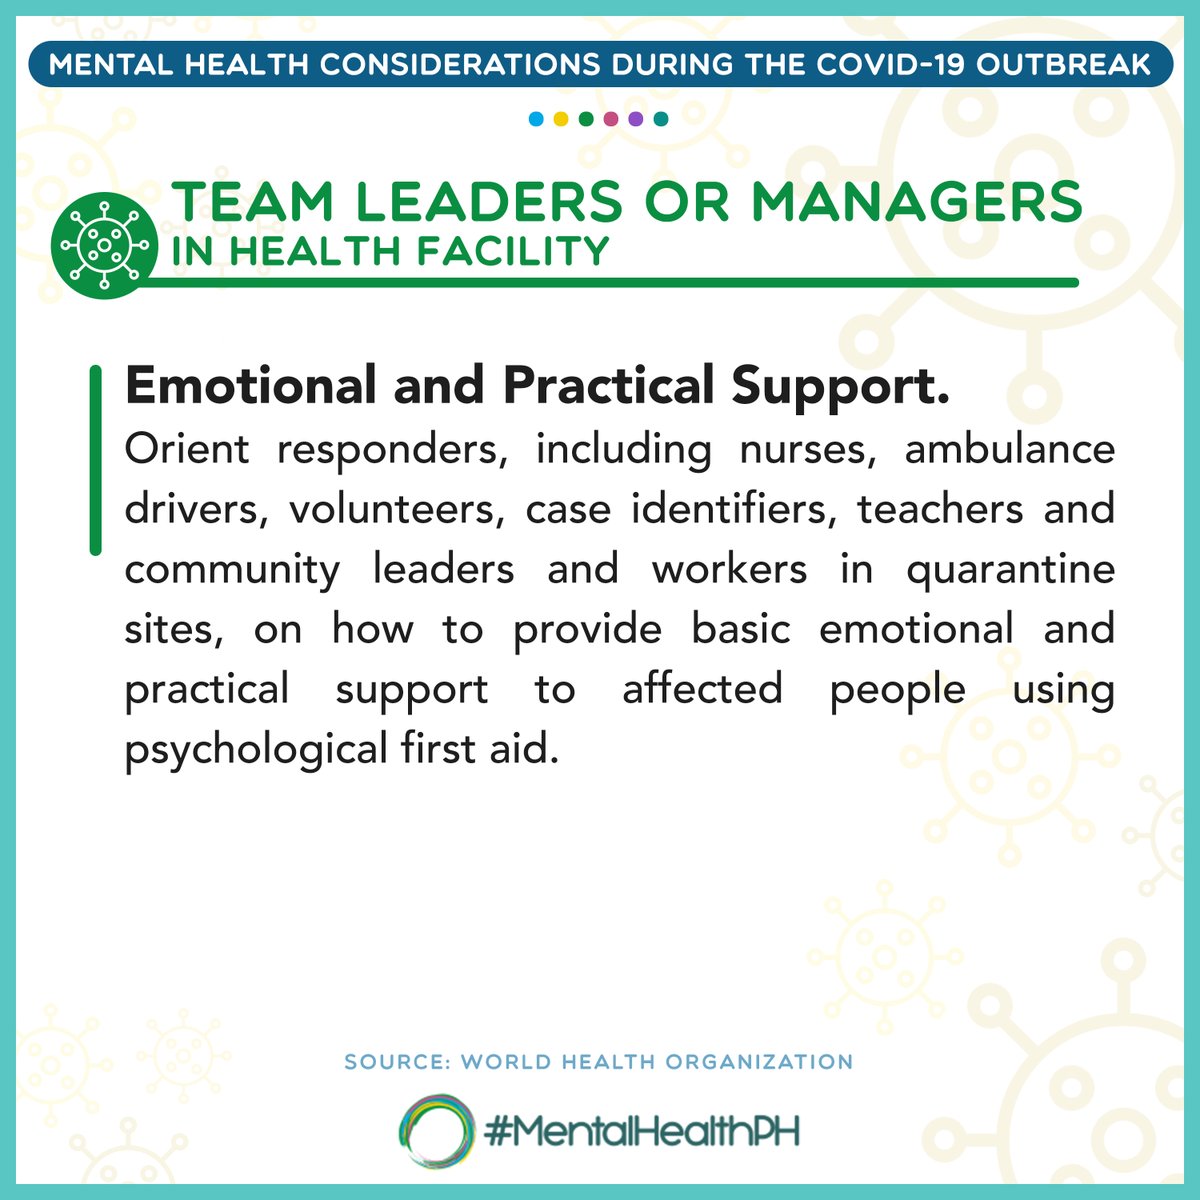 [Mental Health Considerations during COVID-19 Outbreak]For Team Leaders or Managers of Health Facilities #MentalHealthPH  #COVID19(Source:  @WHO) @WHOPhilippines  @gospeakyourmind  @UnitedGMH